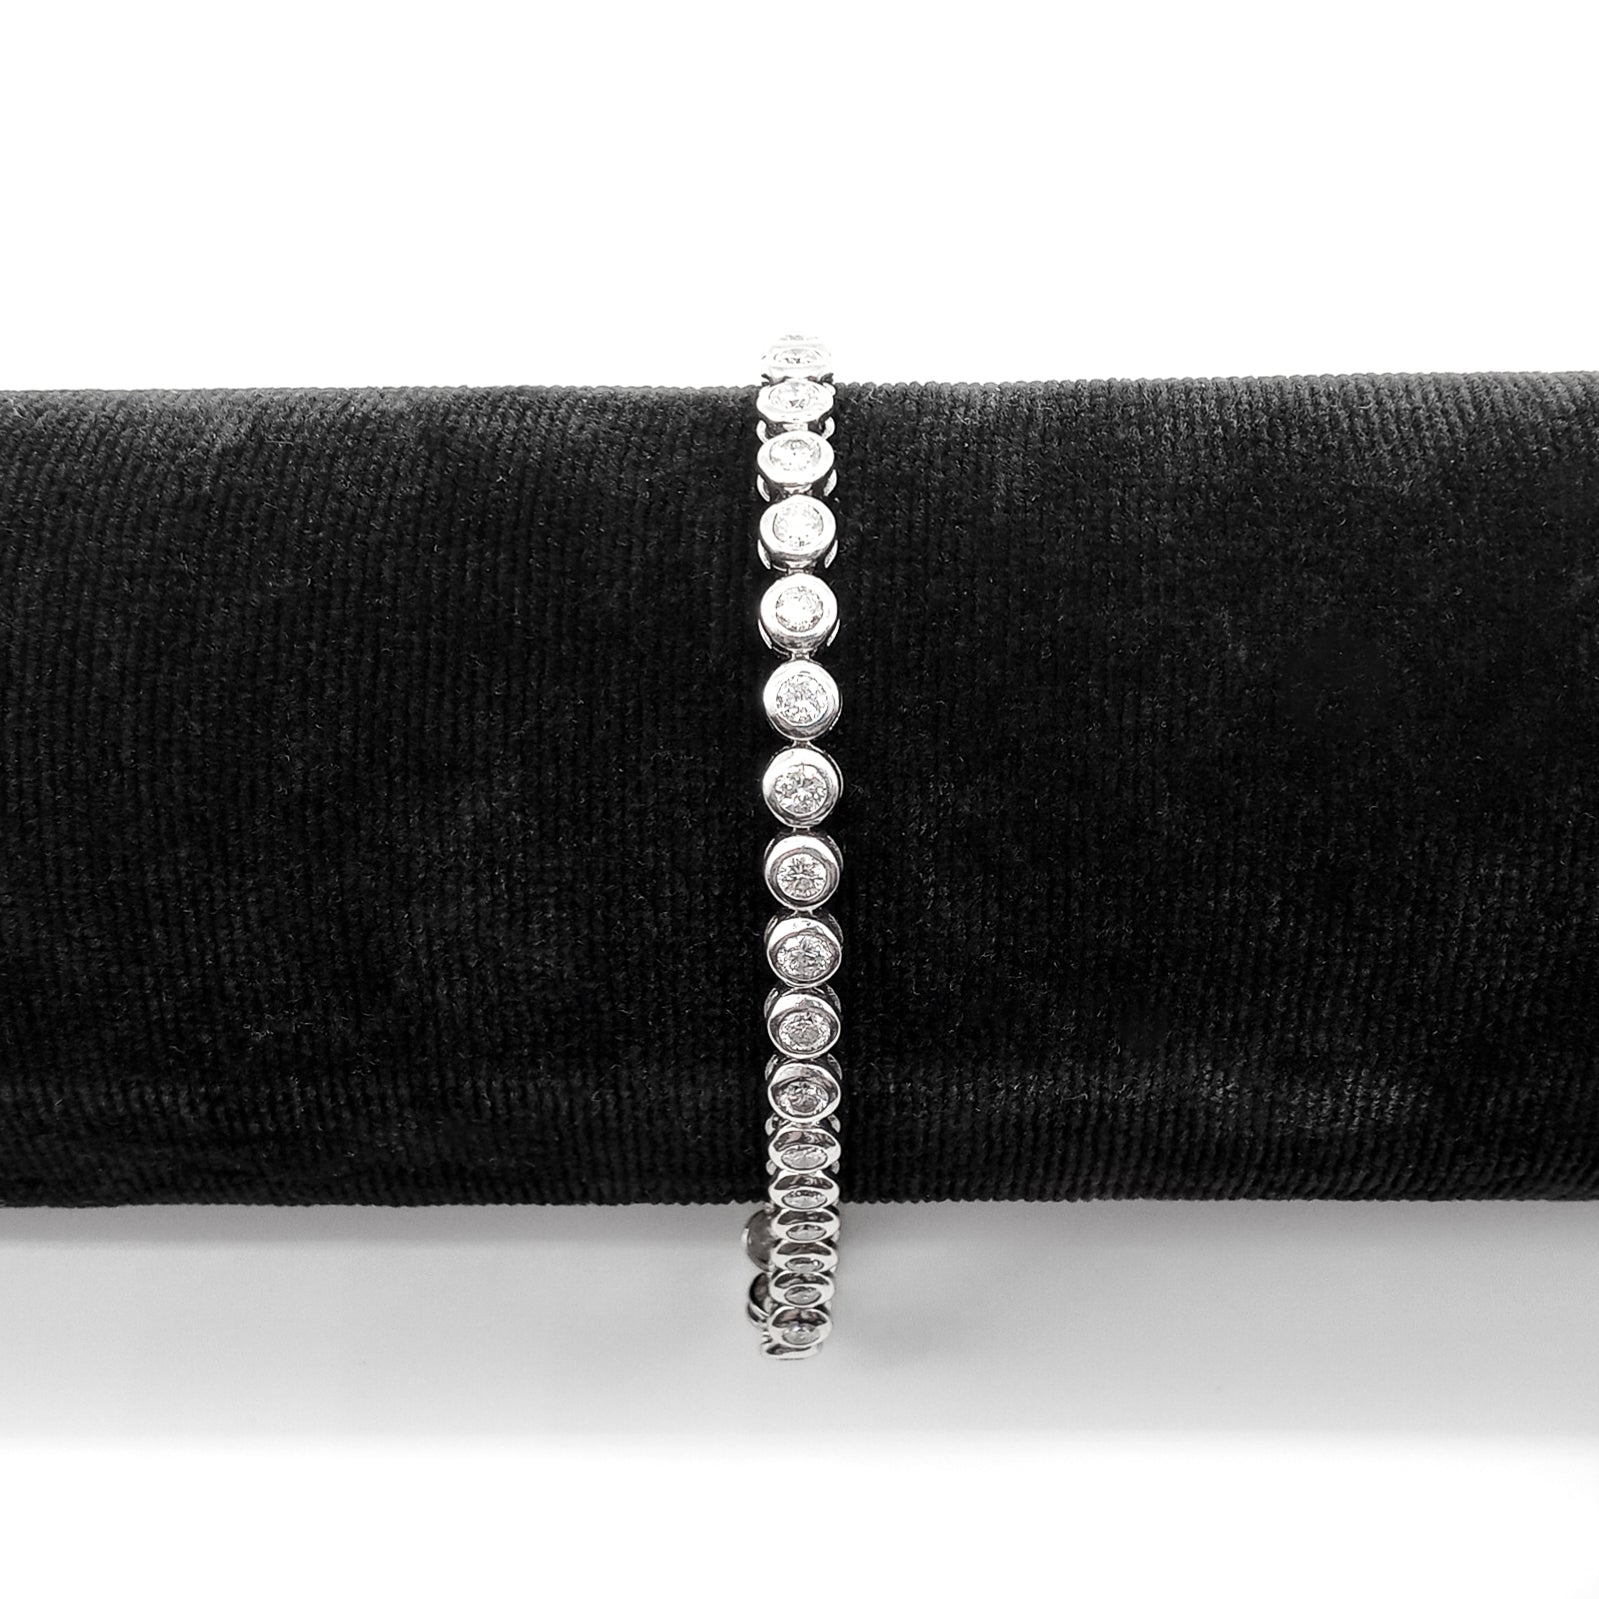 Exquisite tennis bracelet with forty sparkling diamonds, each set in an 18ct white gold tube setting. Bracelet has a safety clasp.